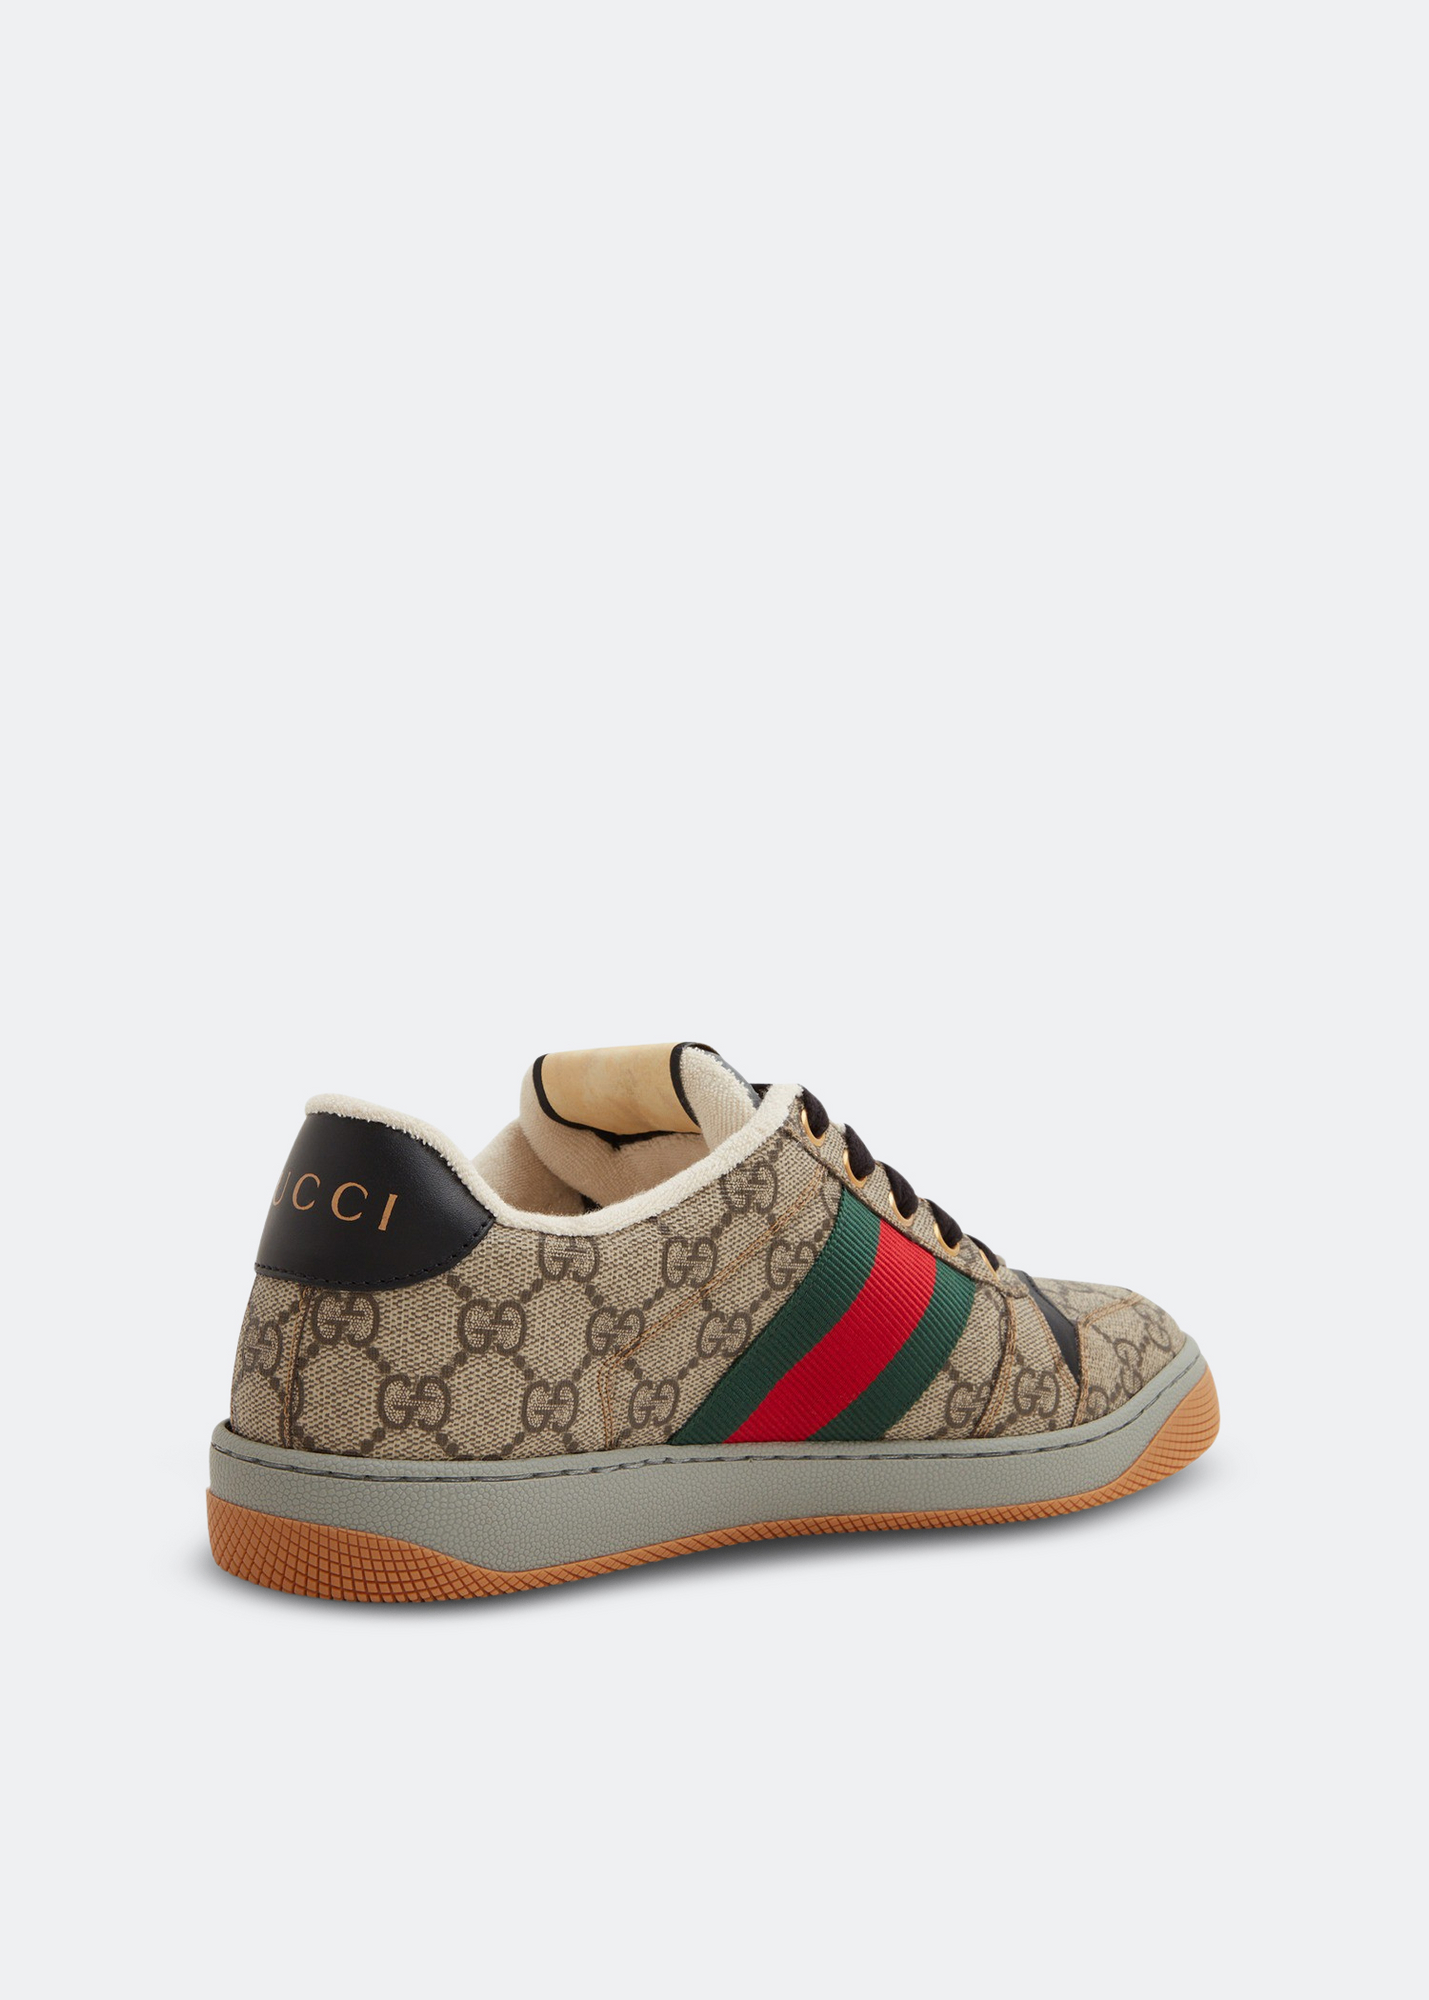 Gucci Screener sneakers for Men - Prints in UAE | Level Shoes